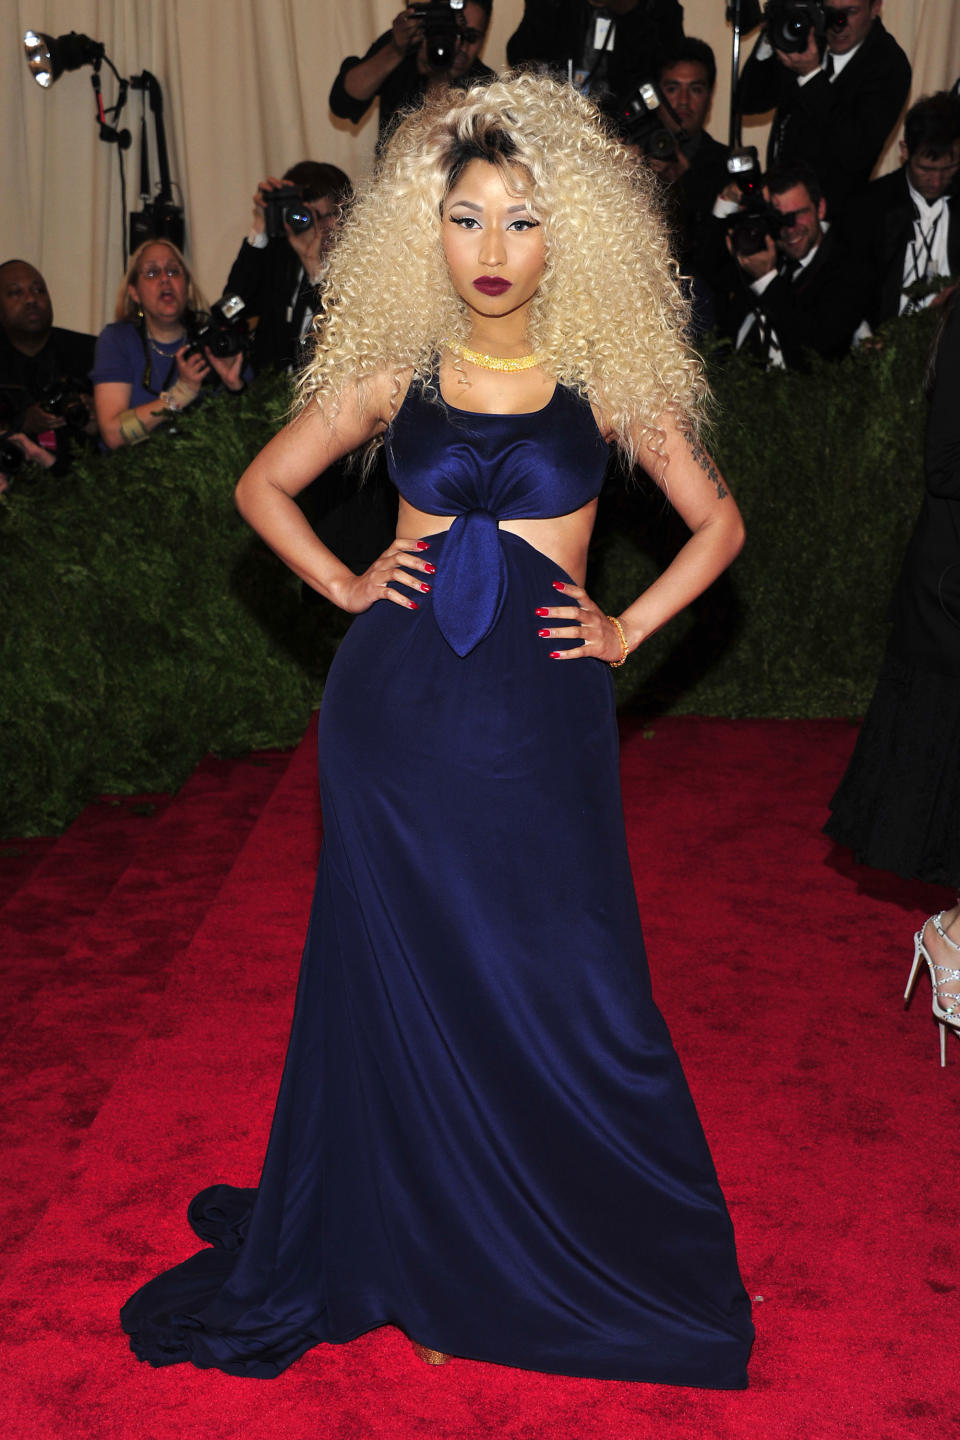 Nicki Minaj attends The Metropolitan Museum of Art's Costume Institute benefit celebrating "PUNK: Chaos to Couture" on Monday May 6, 2013 in New York. (Photo by Charles Sykes/Invision/AP)